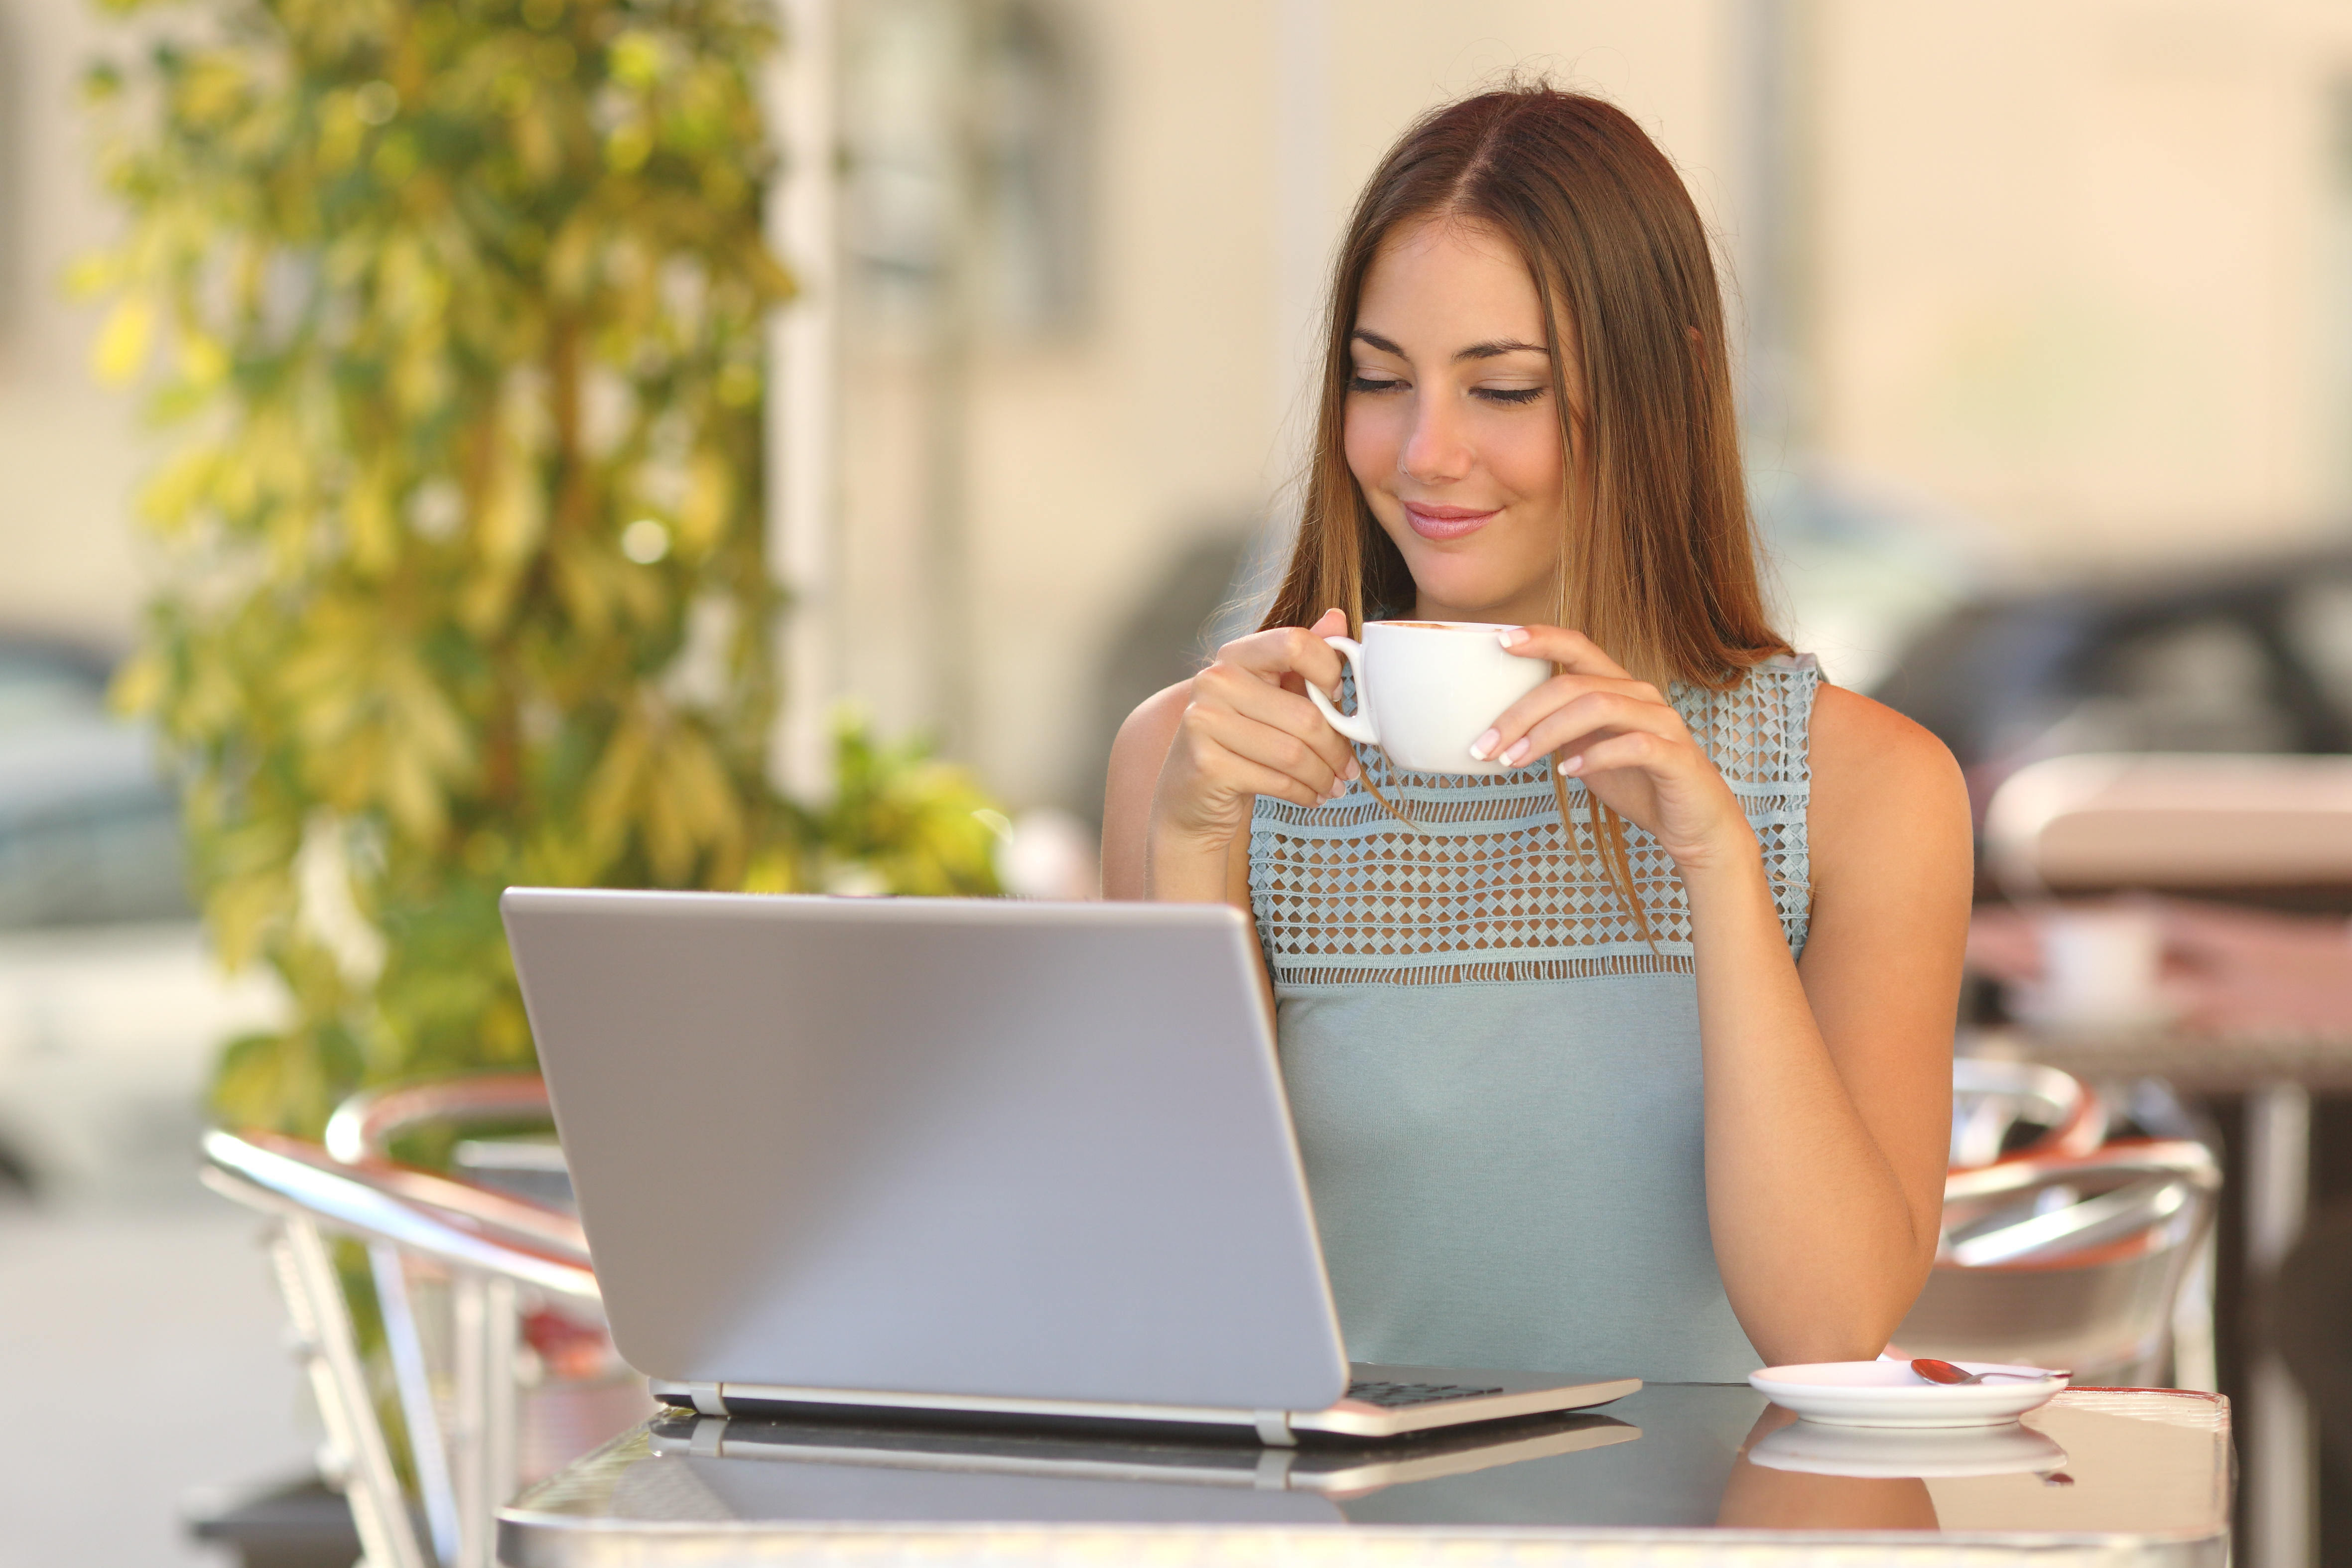 Relaxed woman watching laptop and holding a cup of coffee